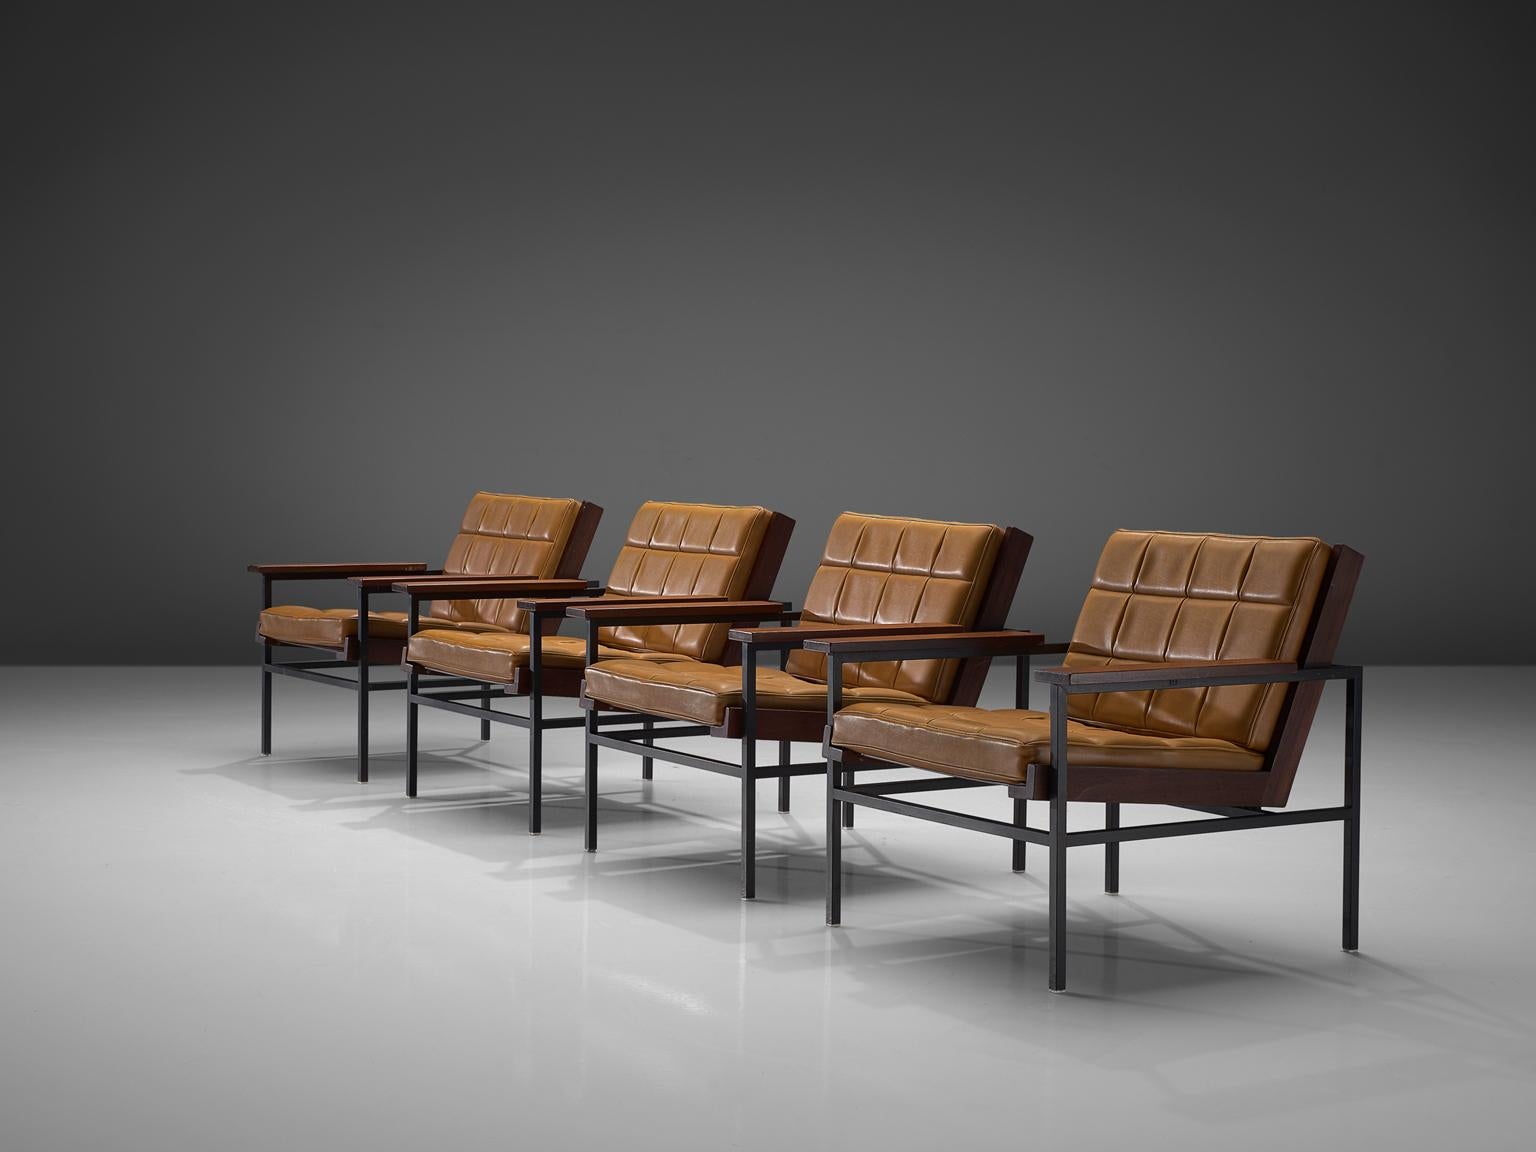 Set of 4 lounge chairs, metal, hardwood and leatherette, The Netherlands, late 1960s.

Modern easy chairs made of a brushed steel that holds the wooden frame for the seat. The armrests are made of hardwood as well. The seat contains cushions